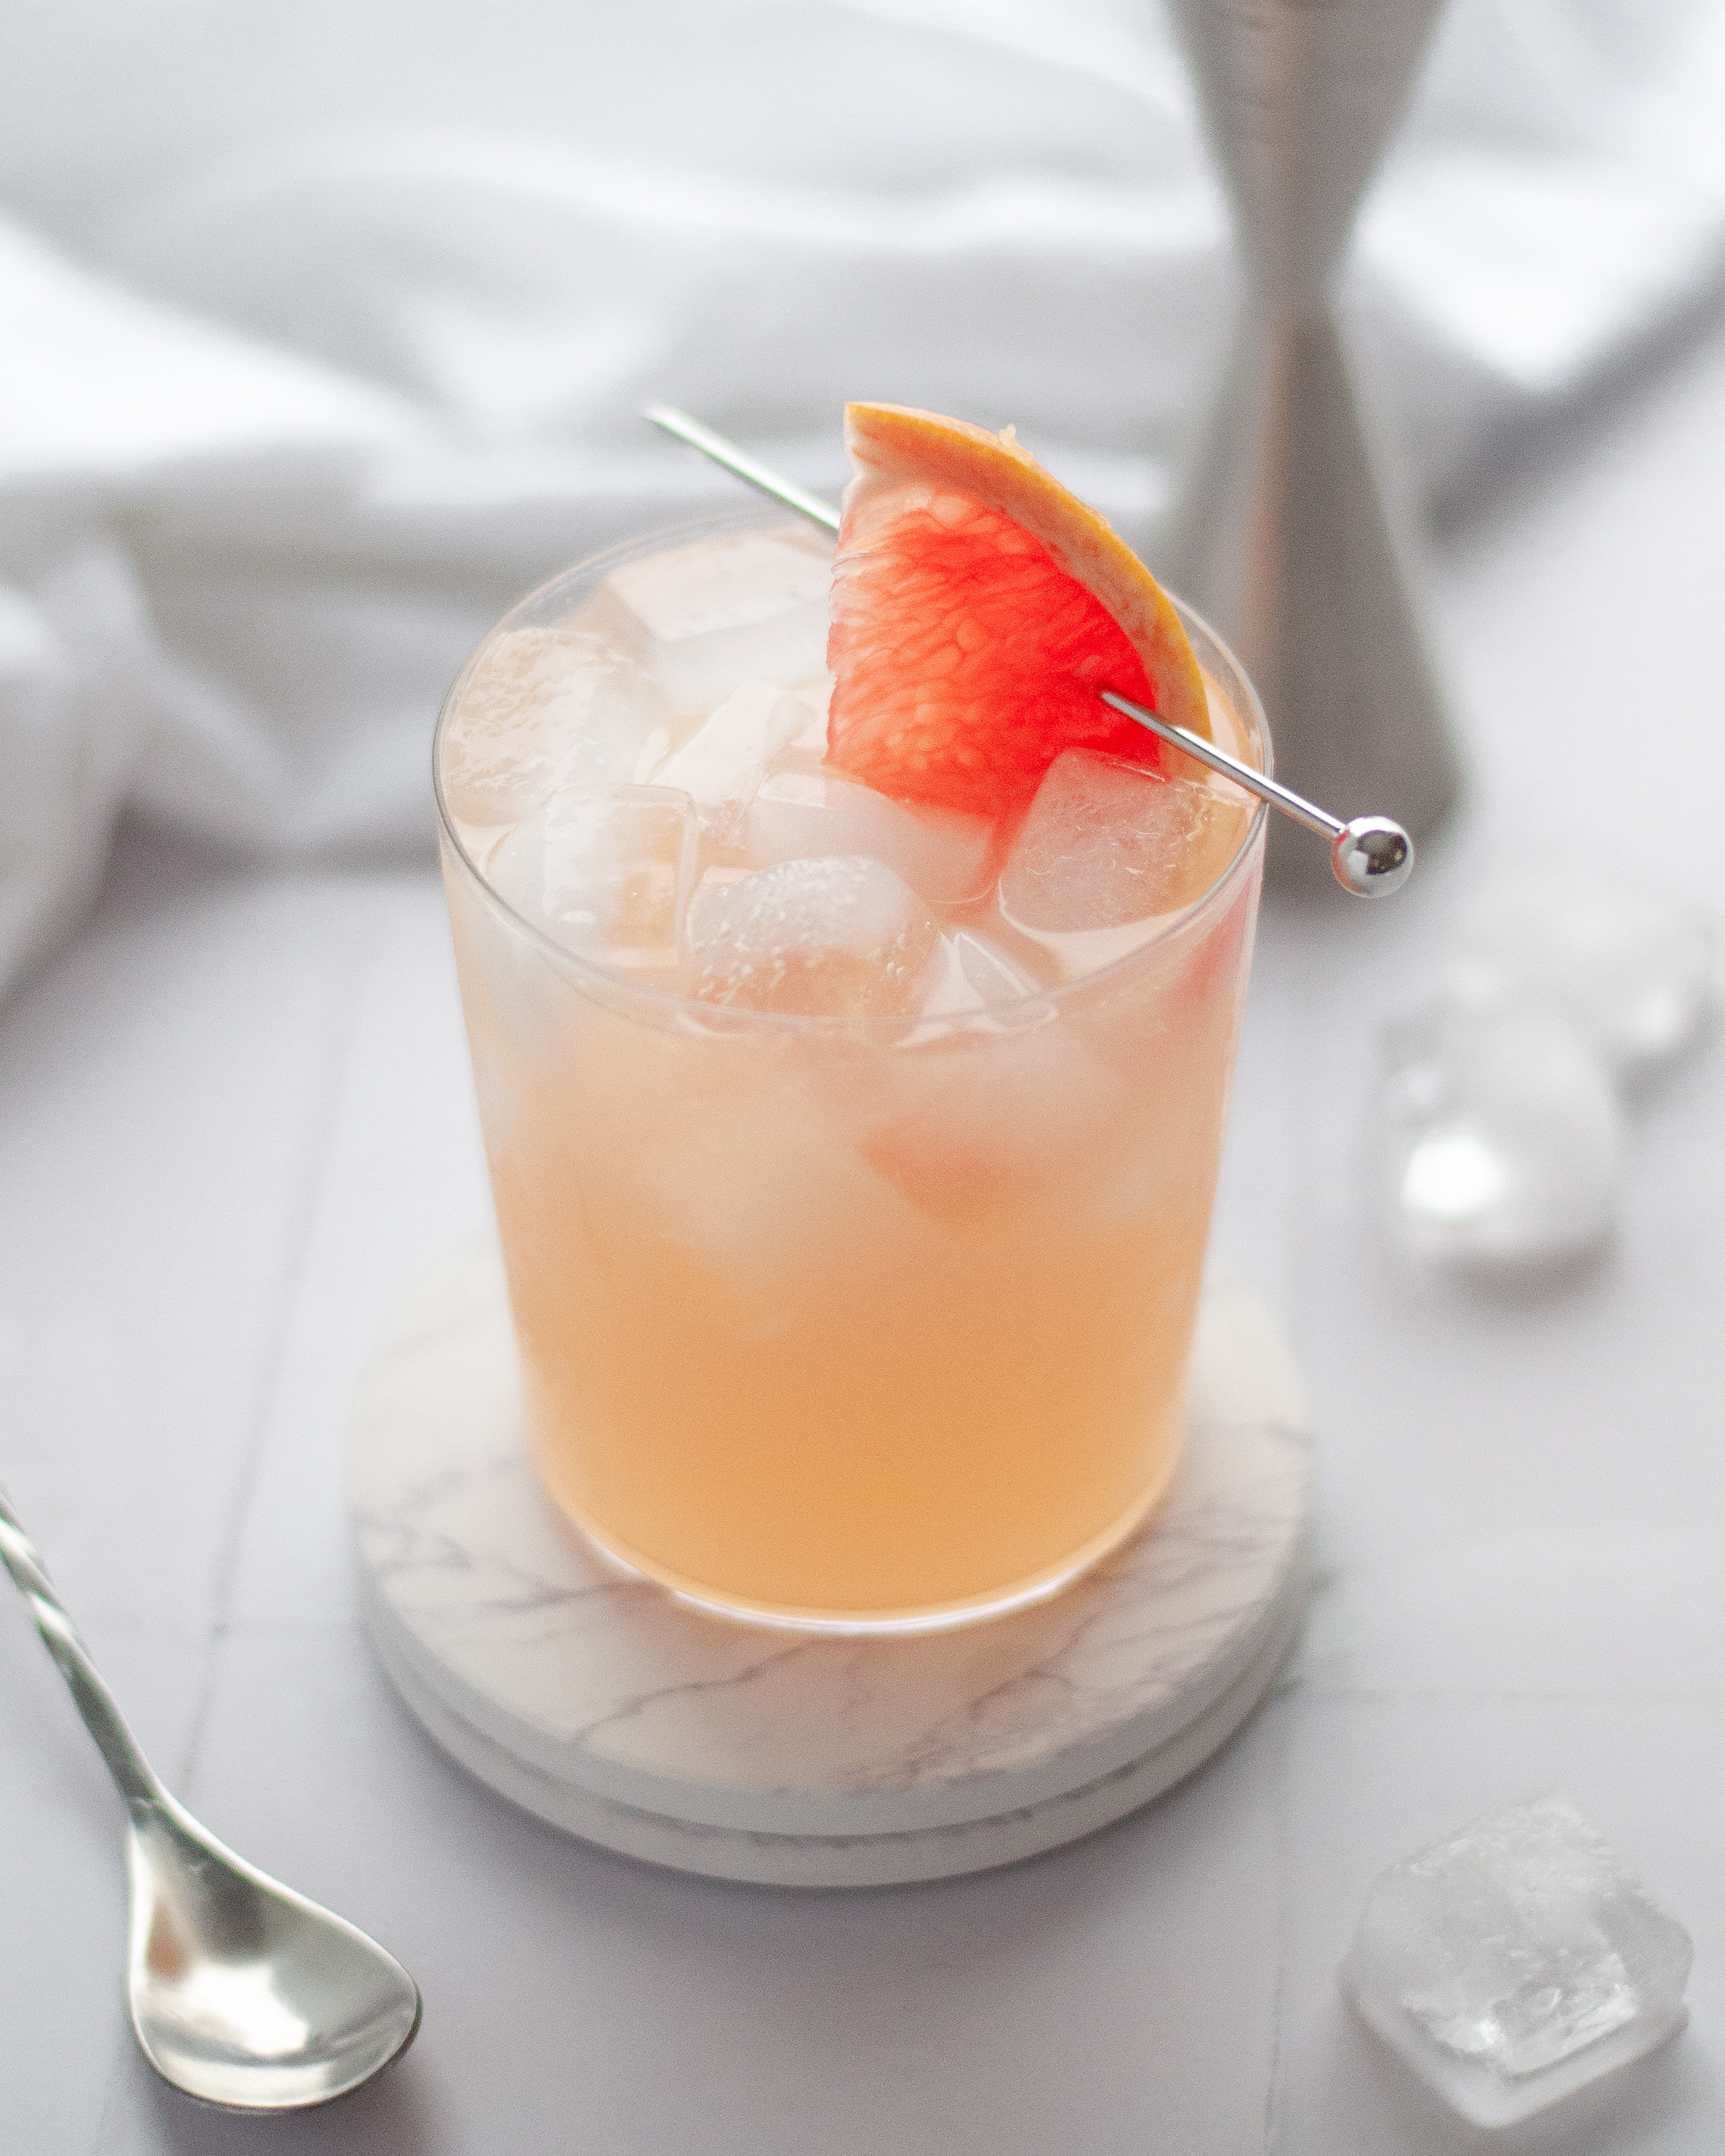 Close up of this easy mocktail recipe. The pink grapefruit mocktail is in a lowball glass filled with ice and garnished with a slice of grapefruit on a cocktail skewer. The glass sits on a few coasters, and a cocktail spoon, jigger, white linen, and ice surround the mocktail.